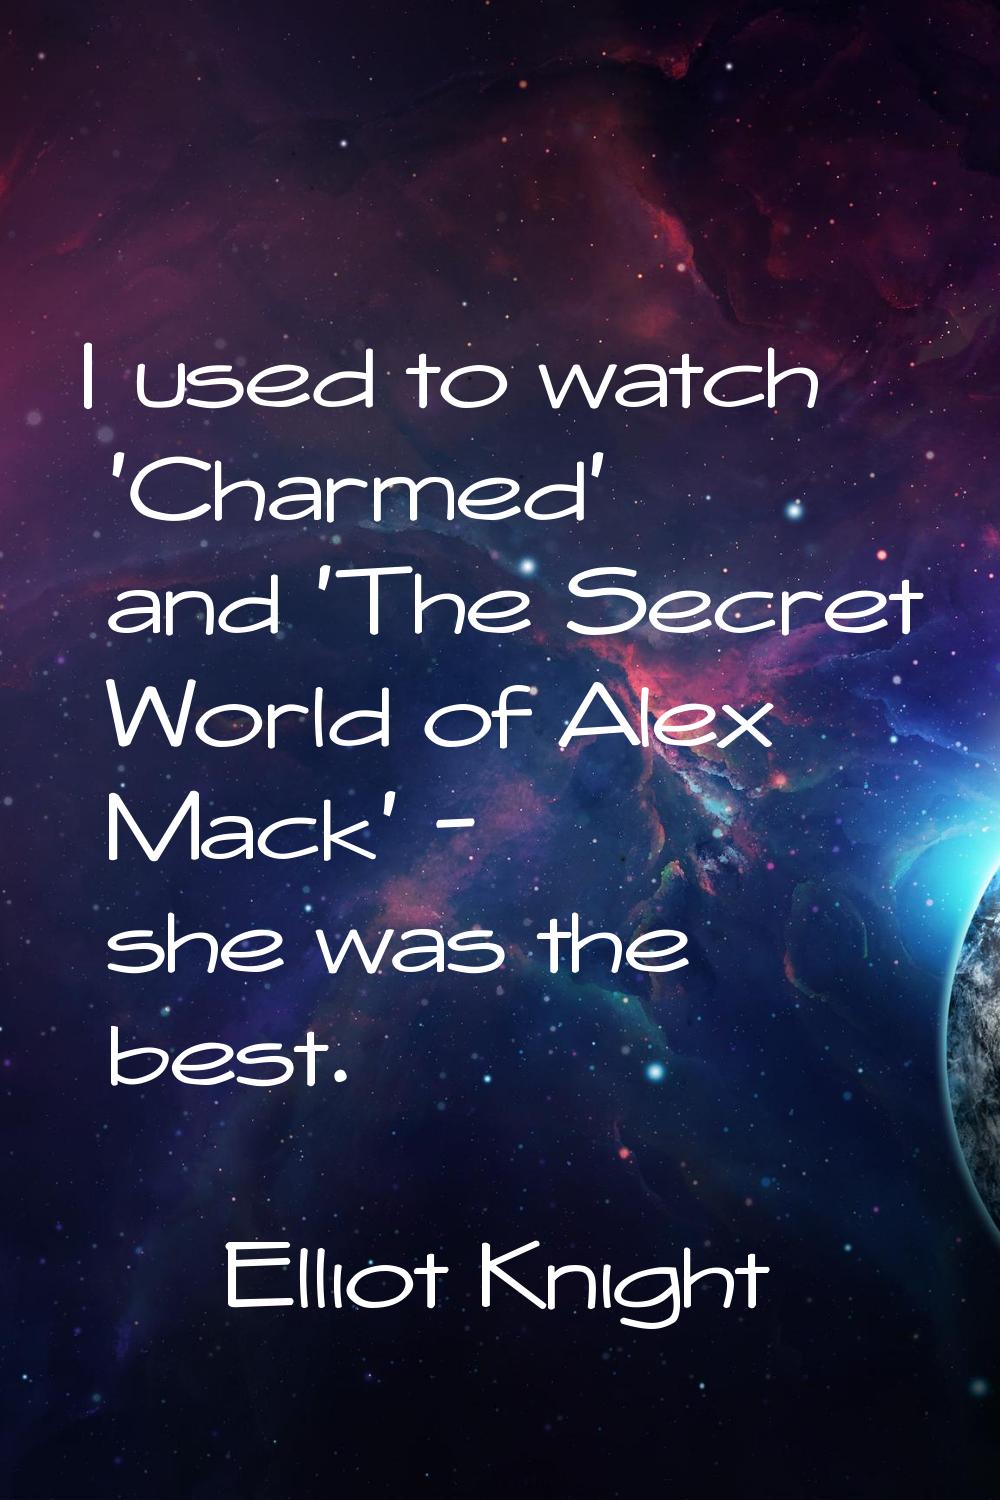 I used to watch 'Charmed' and 'The Secret World of Alex Mack' - she was the best.